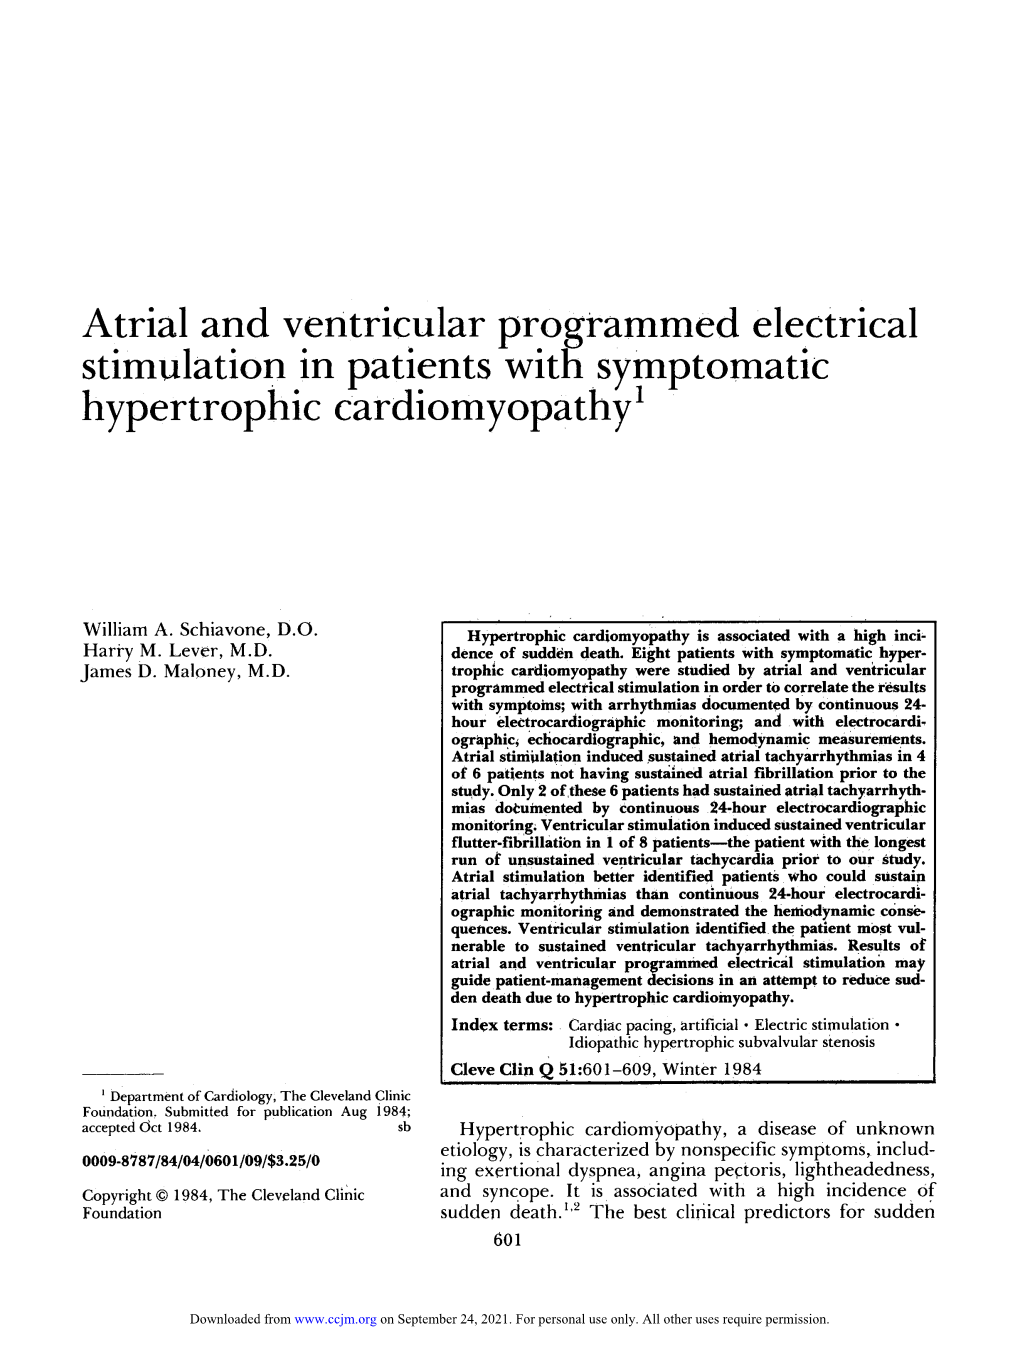 Atrial and Ventricular Programmed Electrical Stimulation in Patients with Symptomatic Hypertrophic Cardiomyopathy1